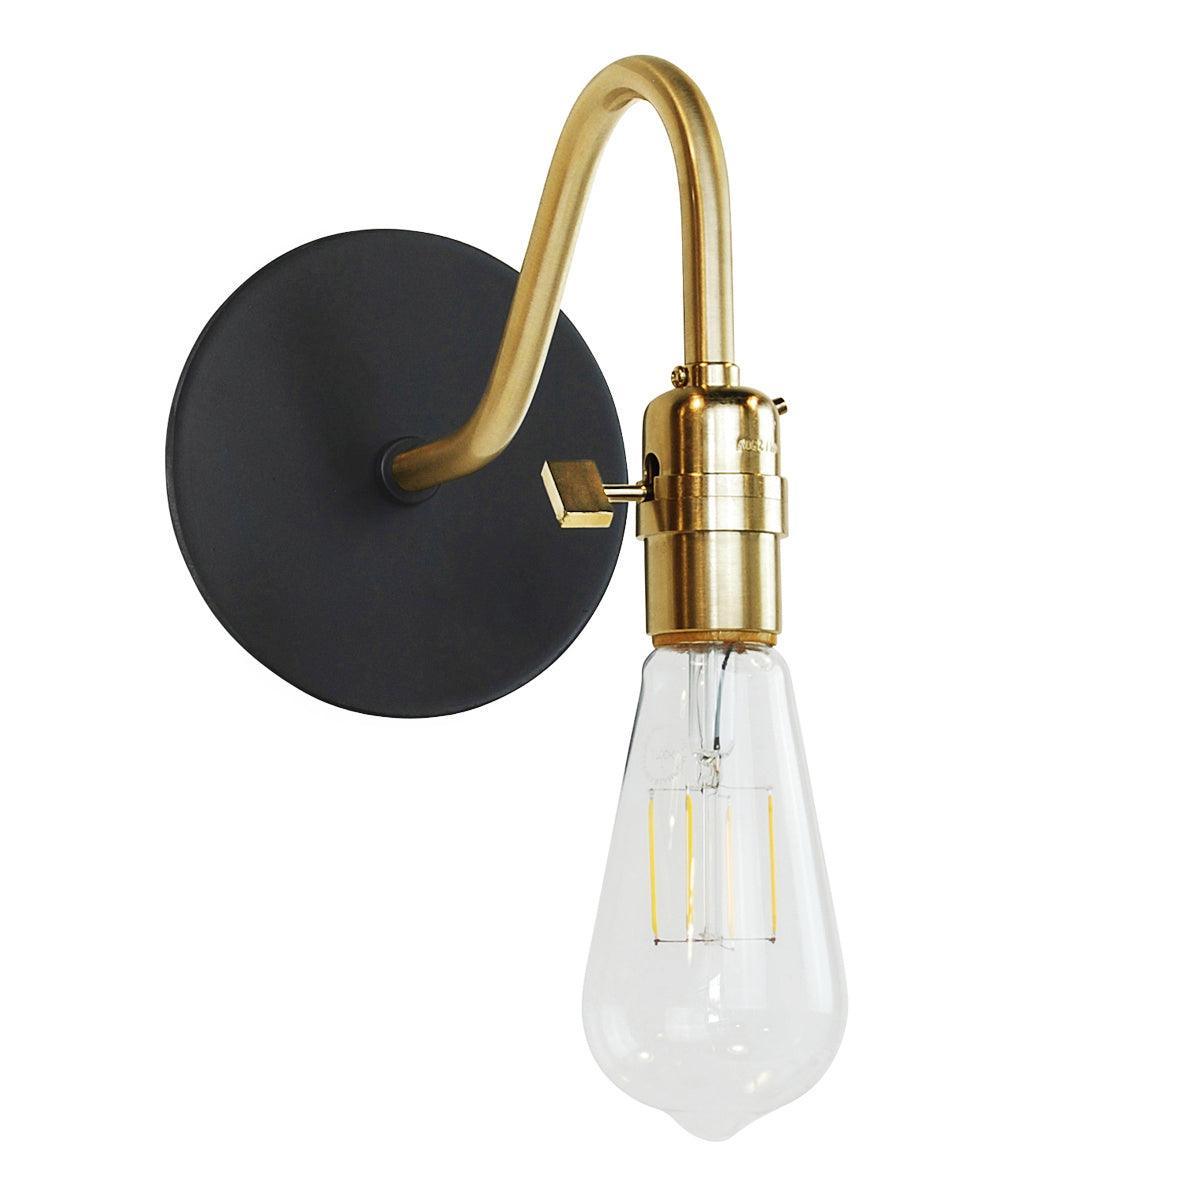 Montclair Light Works - Uno SCL400 Wall Sconce - SCL400-41-91 | Montreal Lighting & Hardware